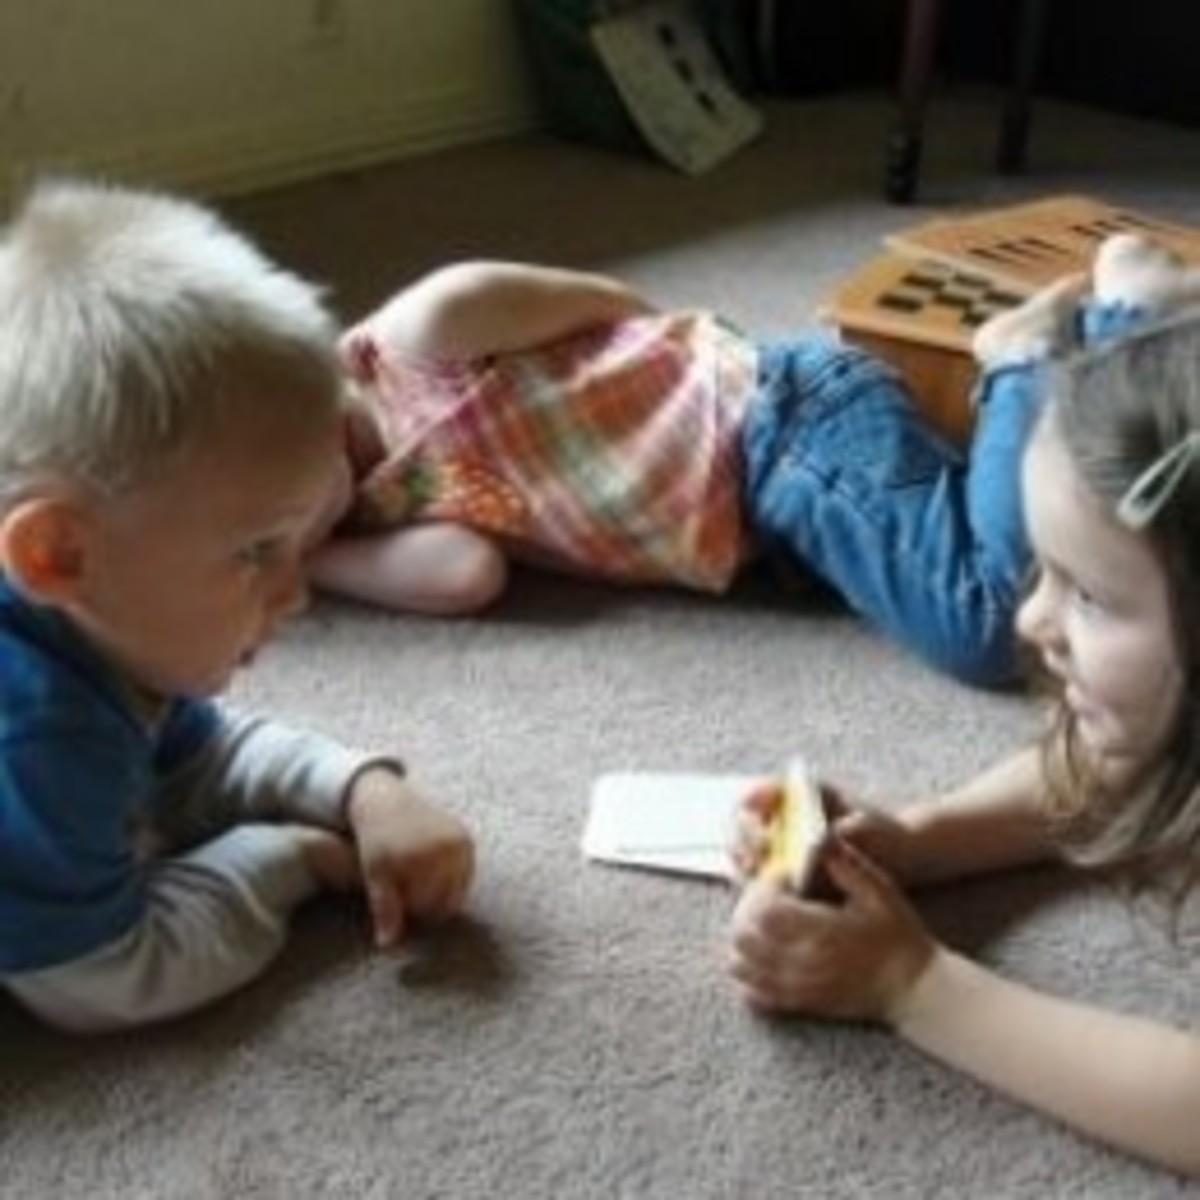 What to Do with Toddlers and Babies While Homeschooling Older Children: Taming Toddler Tornadoes